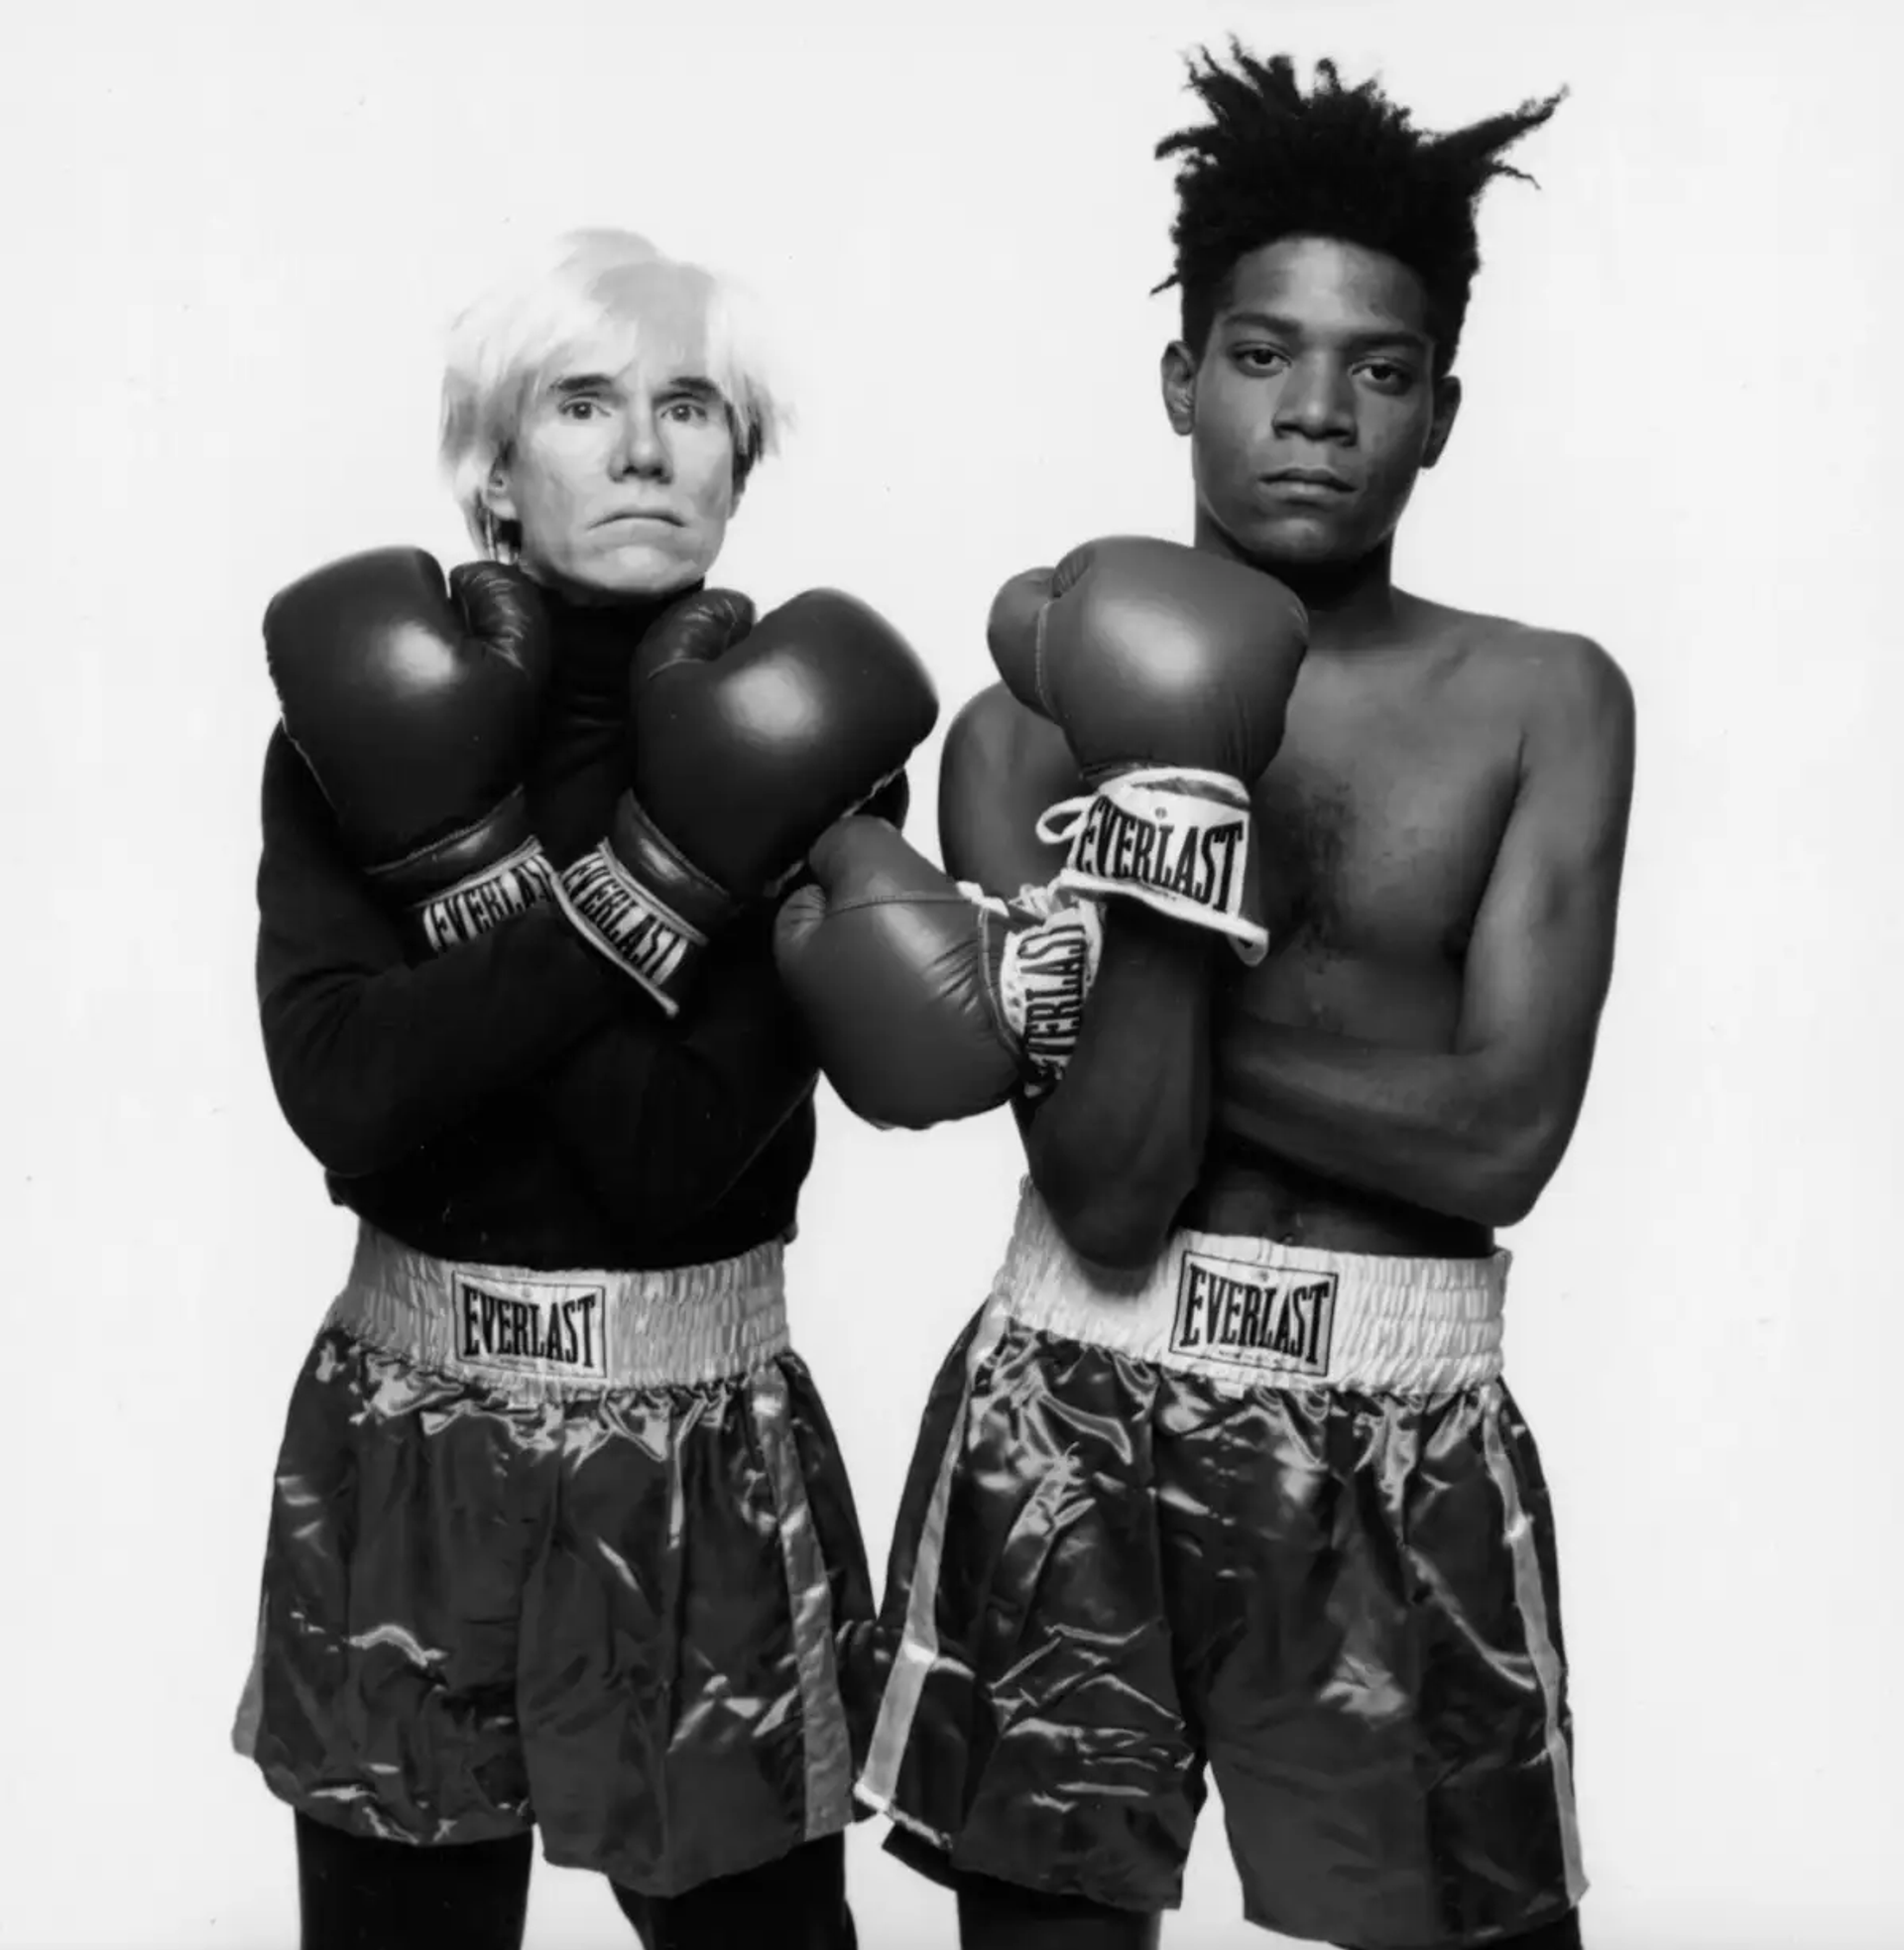 Black and white photograph of Andy Warhol, Jean-Michel Basquiat, Bruno Bischofberger and Fransesco Clemente, New York, 1984.